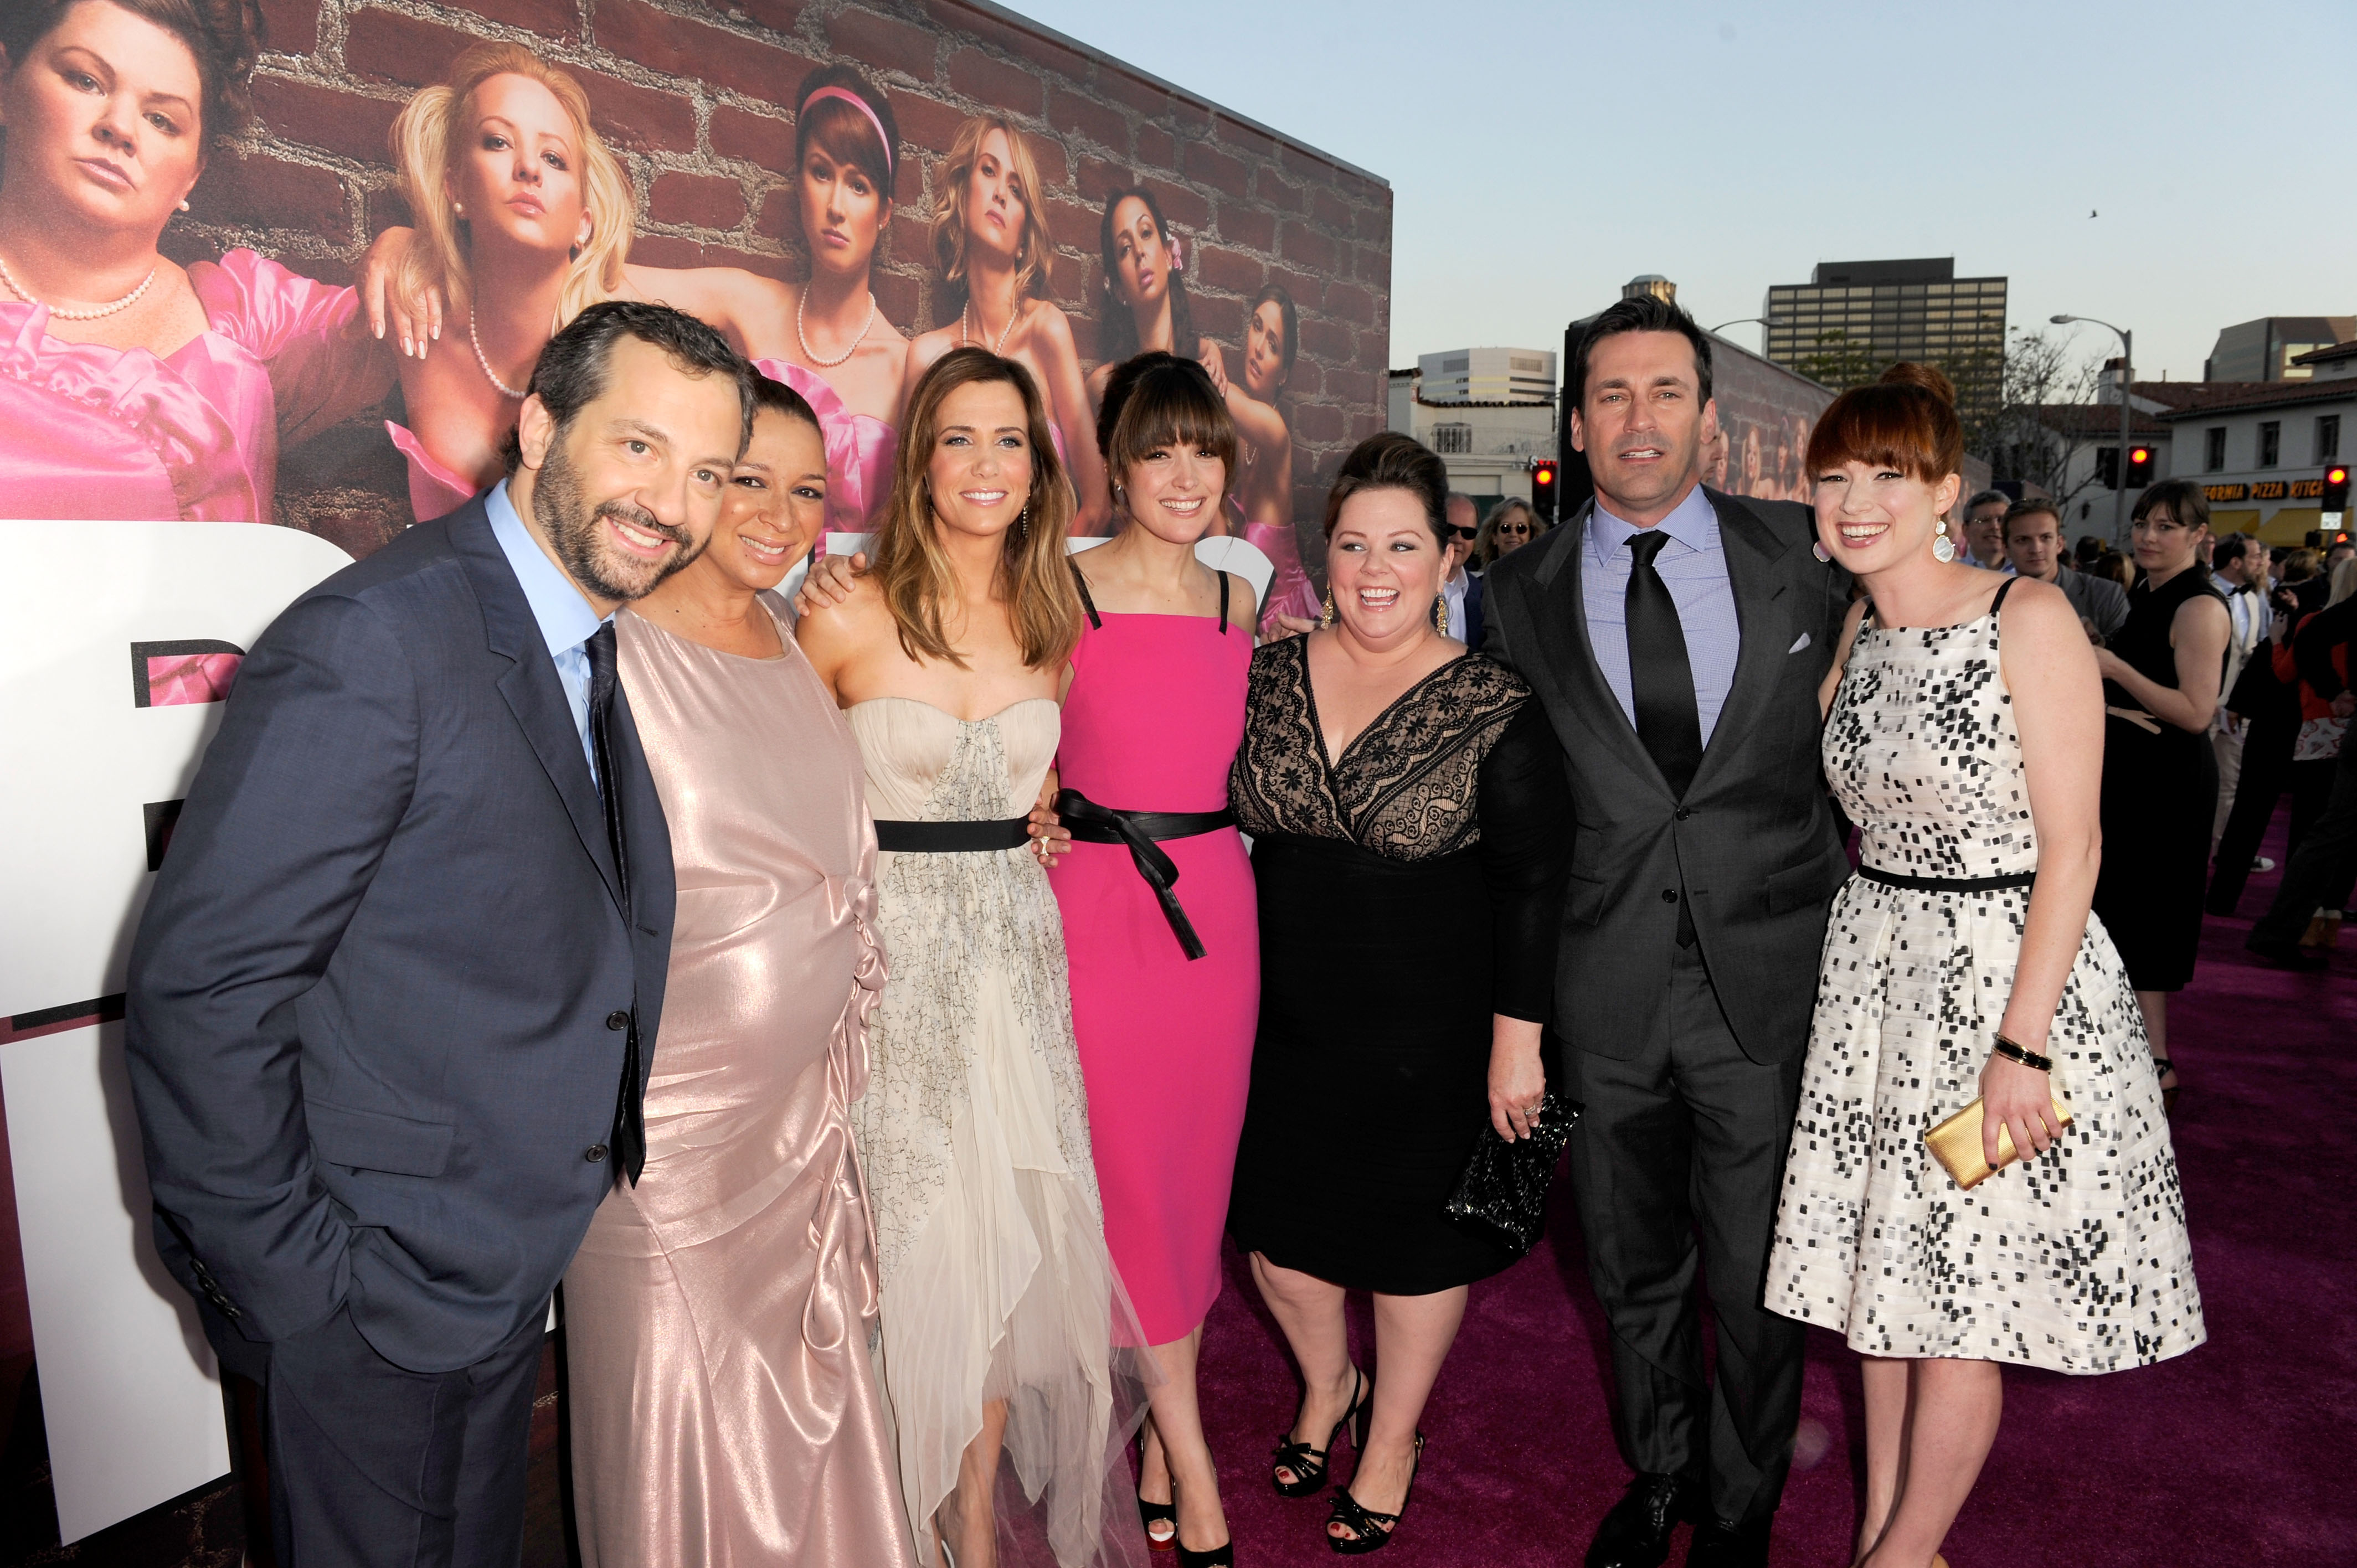 Judd Apatow, Maya Rudolph, Kristen Wiig, Rose Byrne, Melissa McCarthy, Jon Hamm, and Ellie Kemper arrive at the premiere of Universal Pictures' "Bridesmaids" held at Mann Village Theatre on April 28, 2011, in Los Angeles, California. | Source: Getty Images